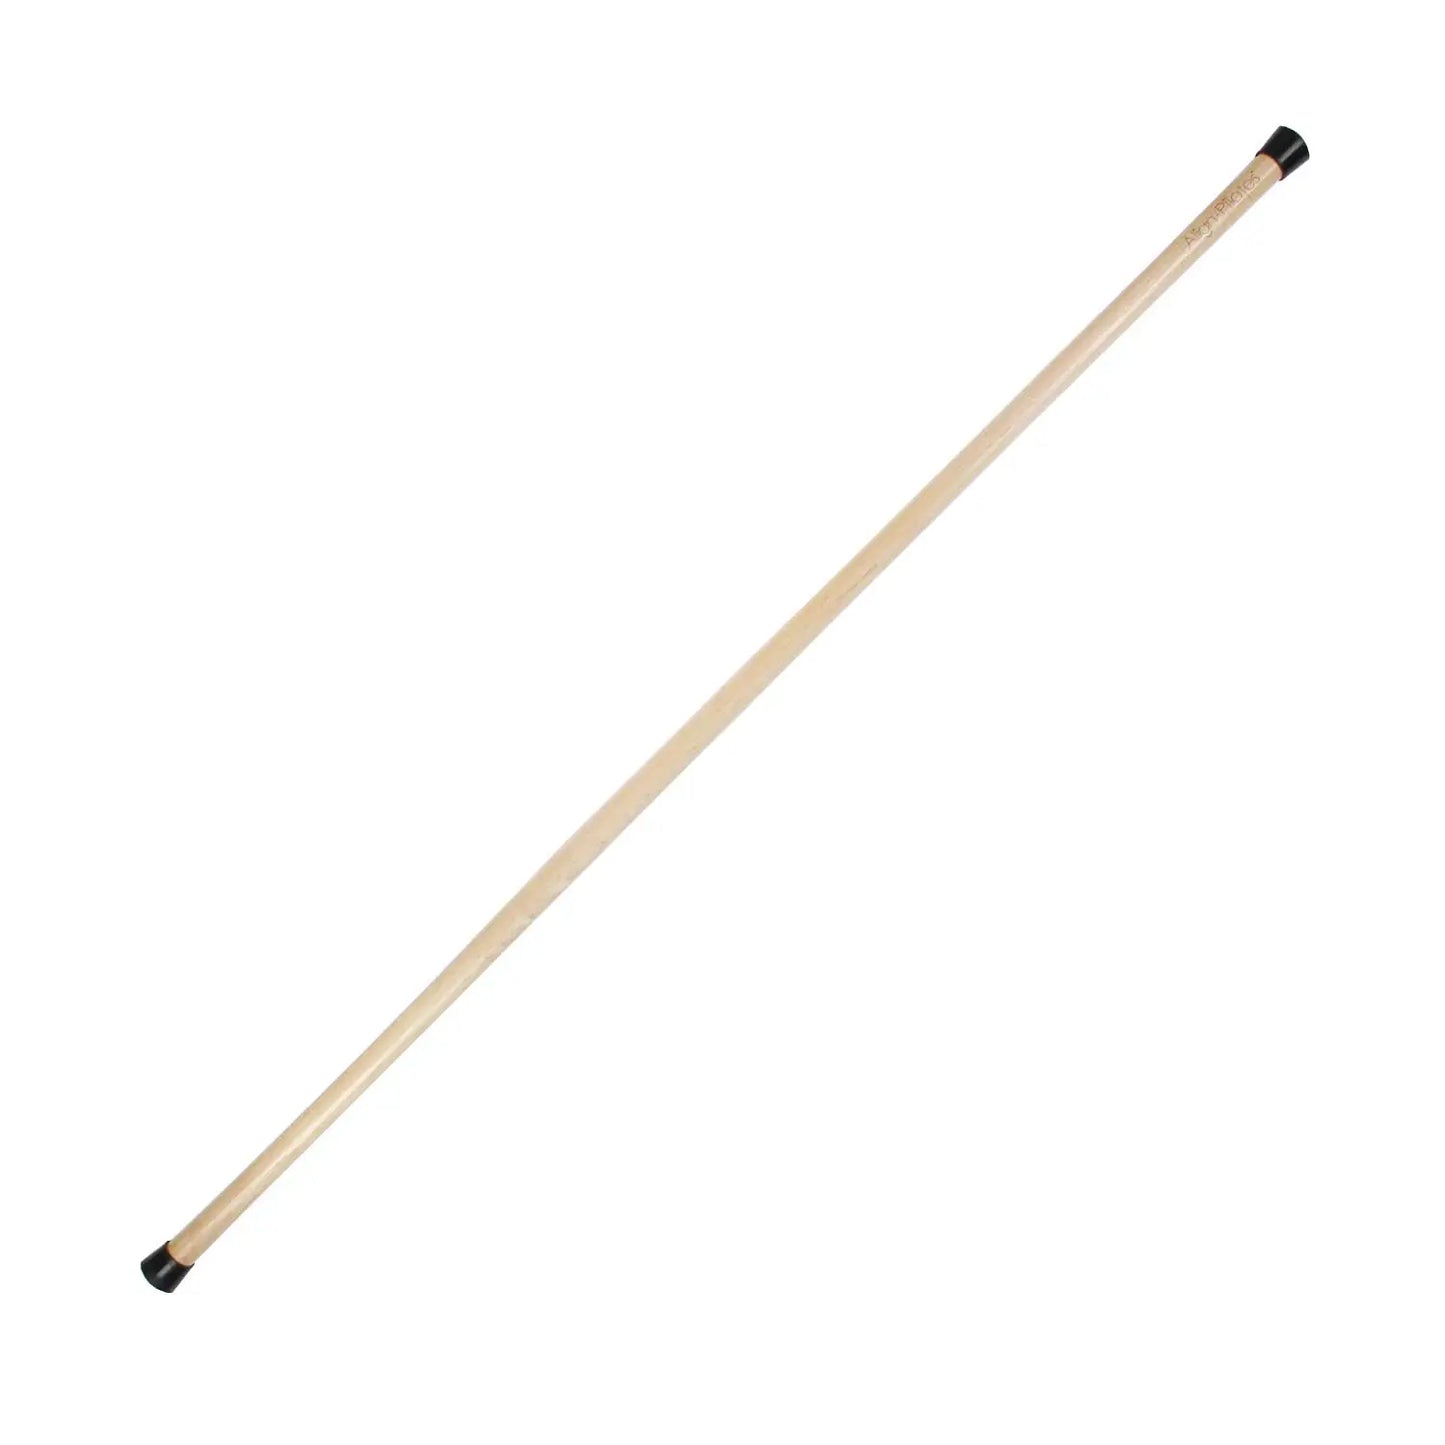  Align Pilates Gondola Maple Pole by Align Pilates sold by Pilates Matters® by BSP LLC